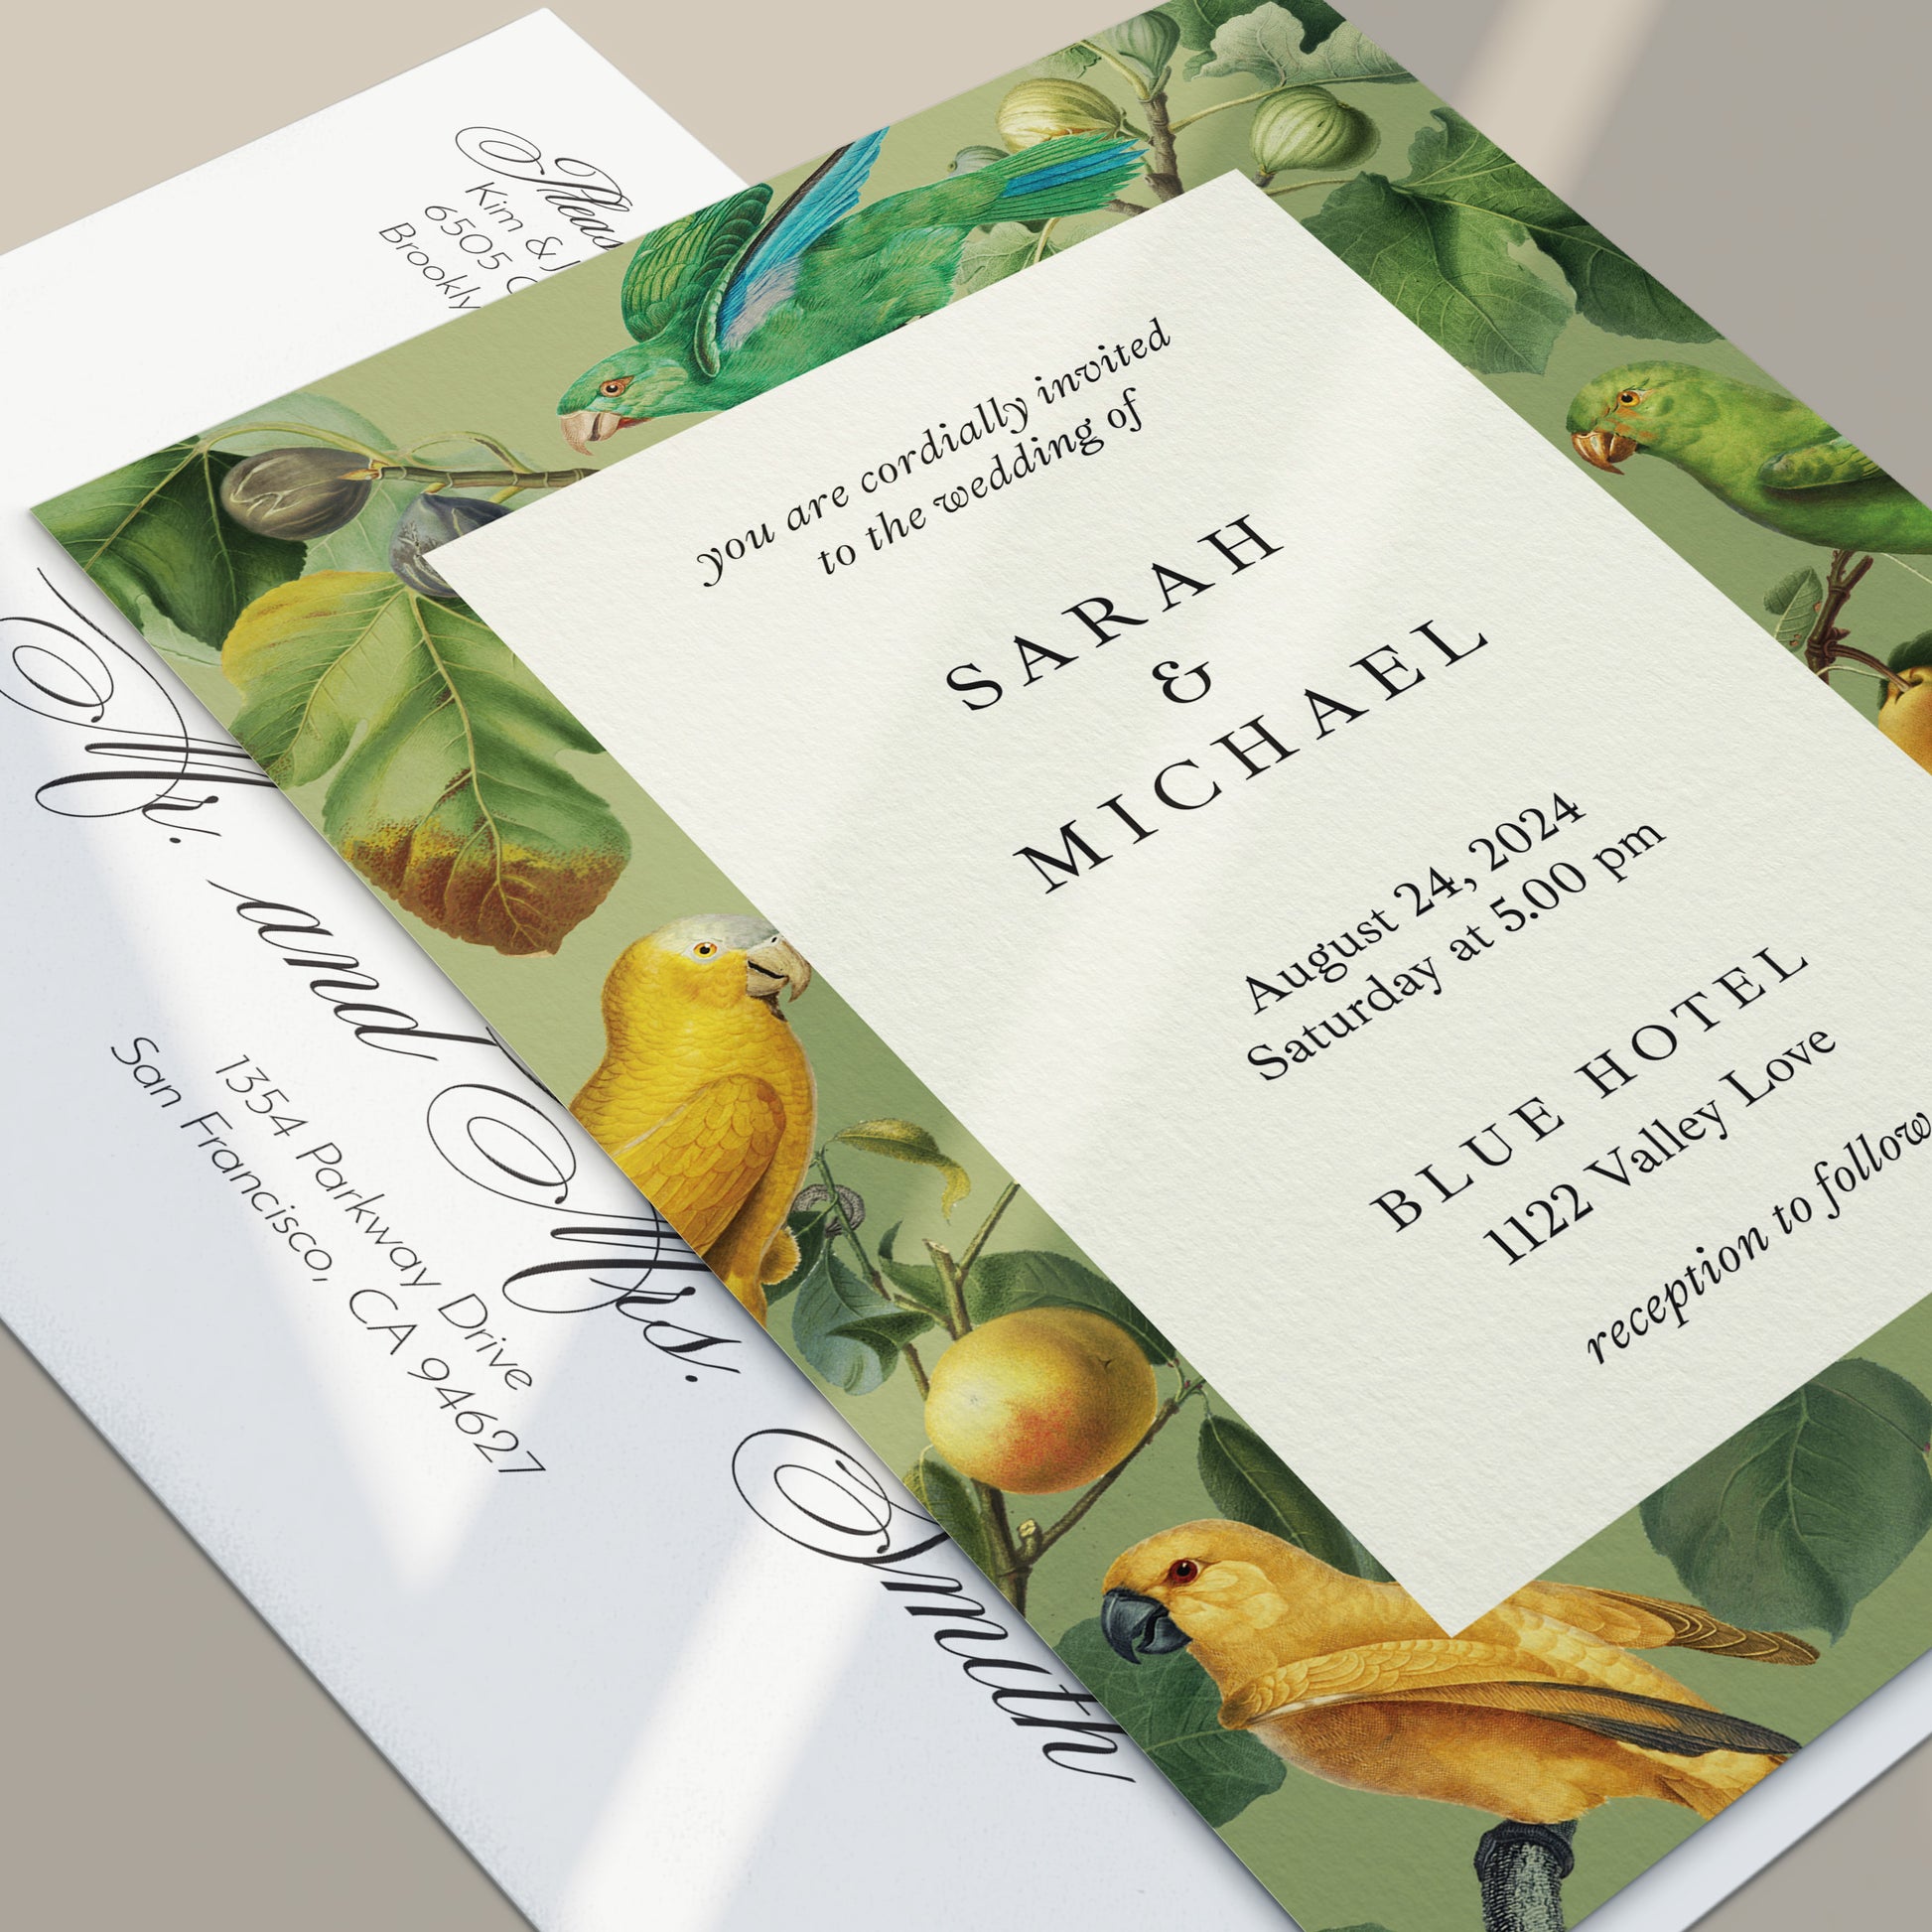 tropical wedding invitations with exotic parrot and trees design - XOXOKristen